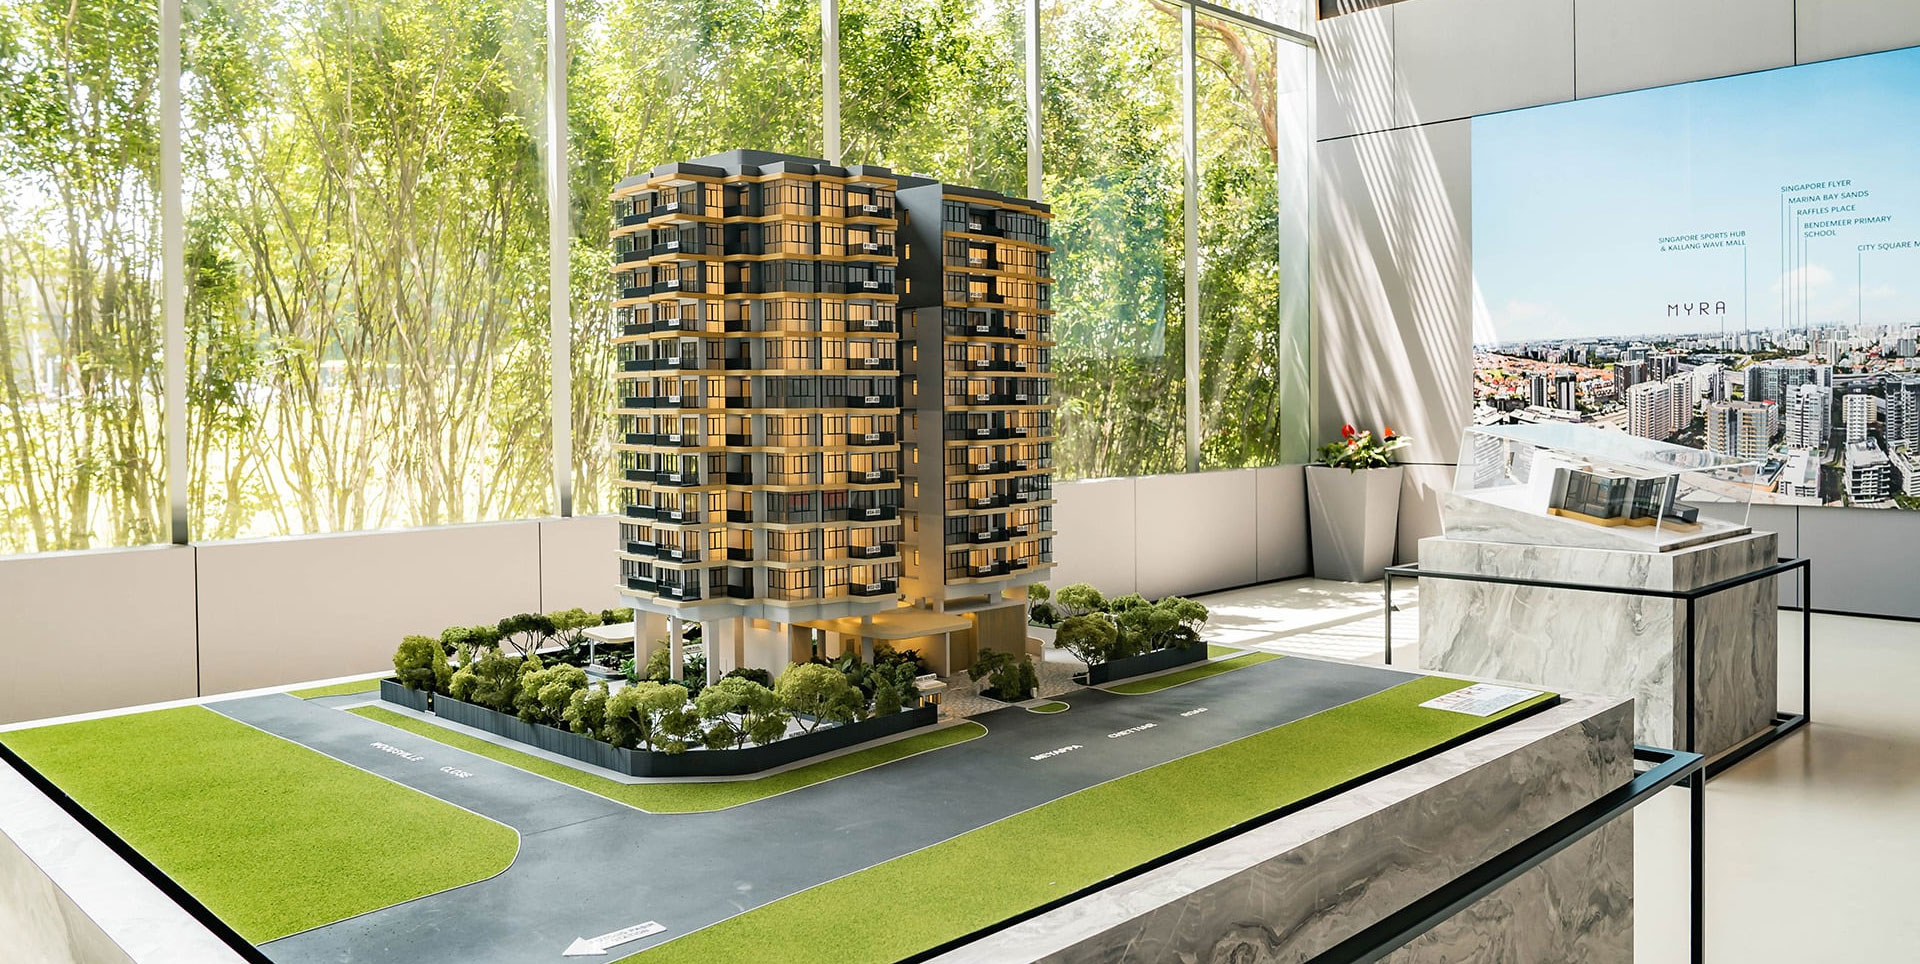 Located in the potential Potong Pasir area, Myra possesses many impressive advantages